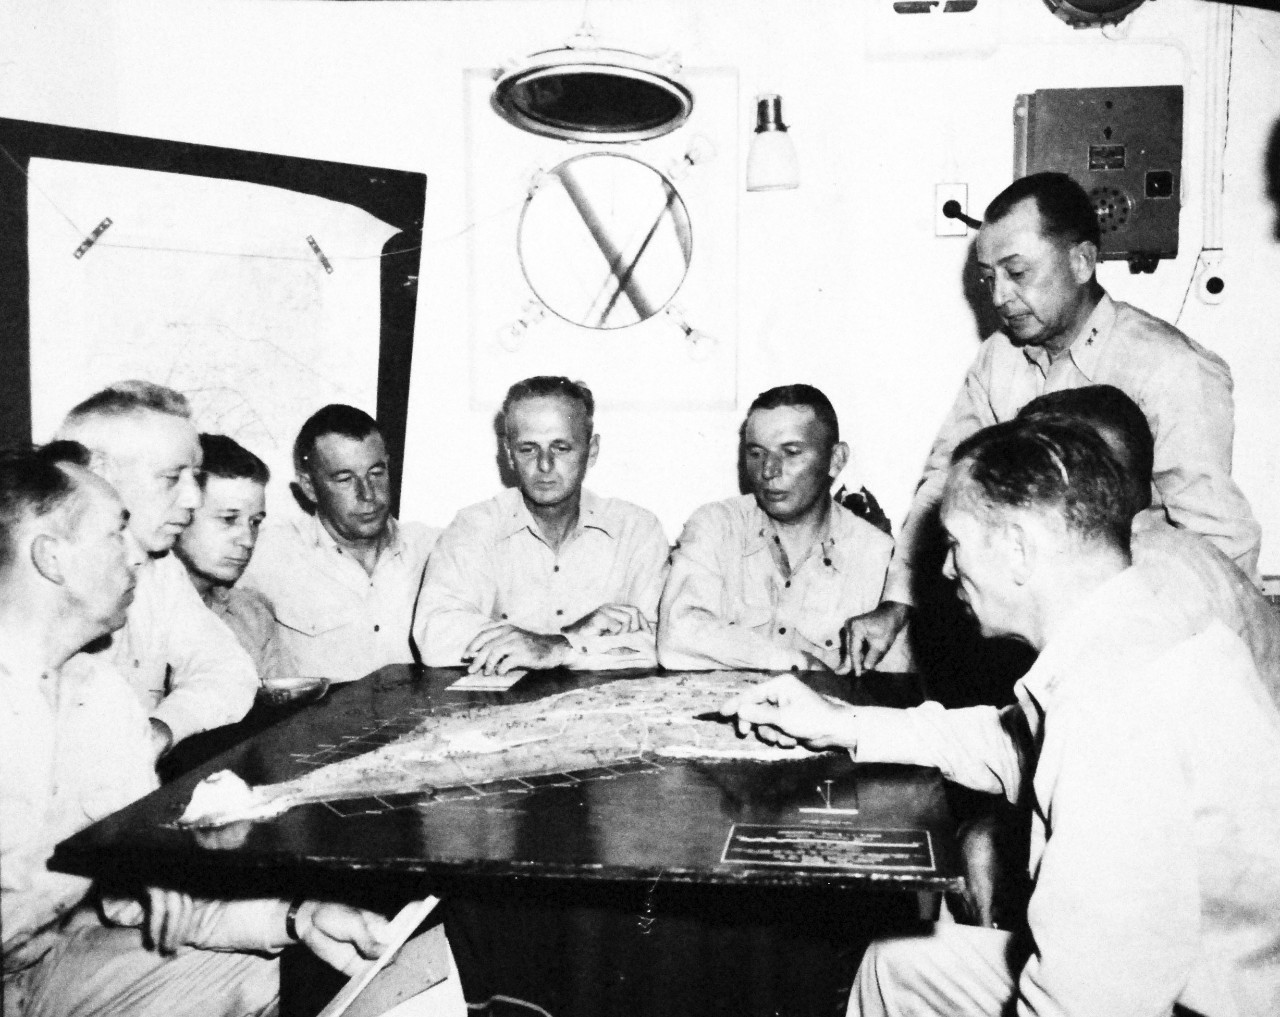 127-GW-302-142479:  Battle for Iwo Jima, February-March 1945.   General Clifton B. Cates with executive staff and regiment commanders in final conference aboard ship.  Photographed by Morejohn, 1945.  Official U.S. Marine Corps photograph, now in the collections of the National Archives.  (2016/02/17).